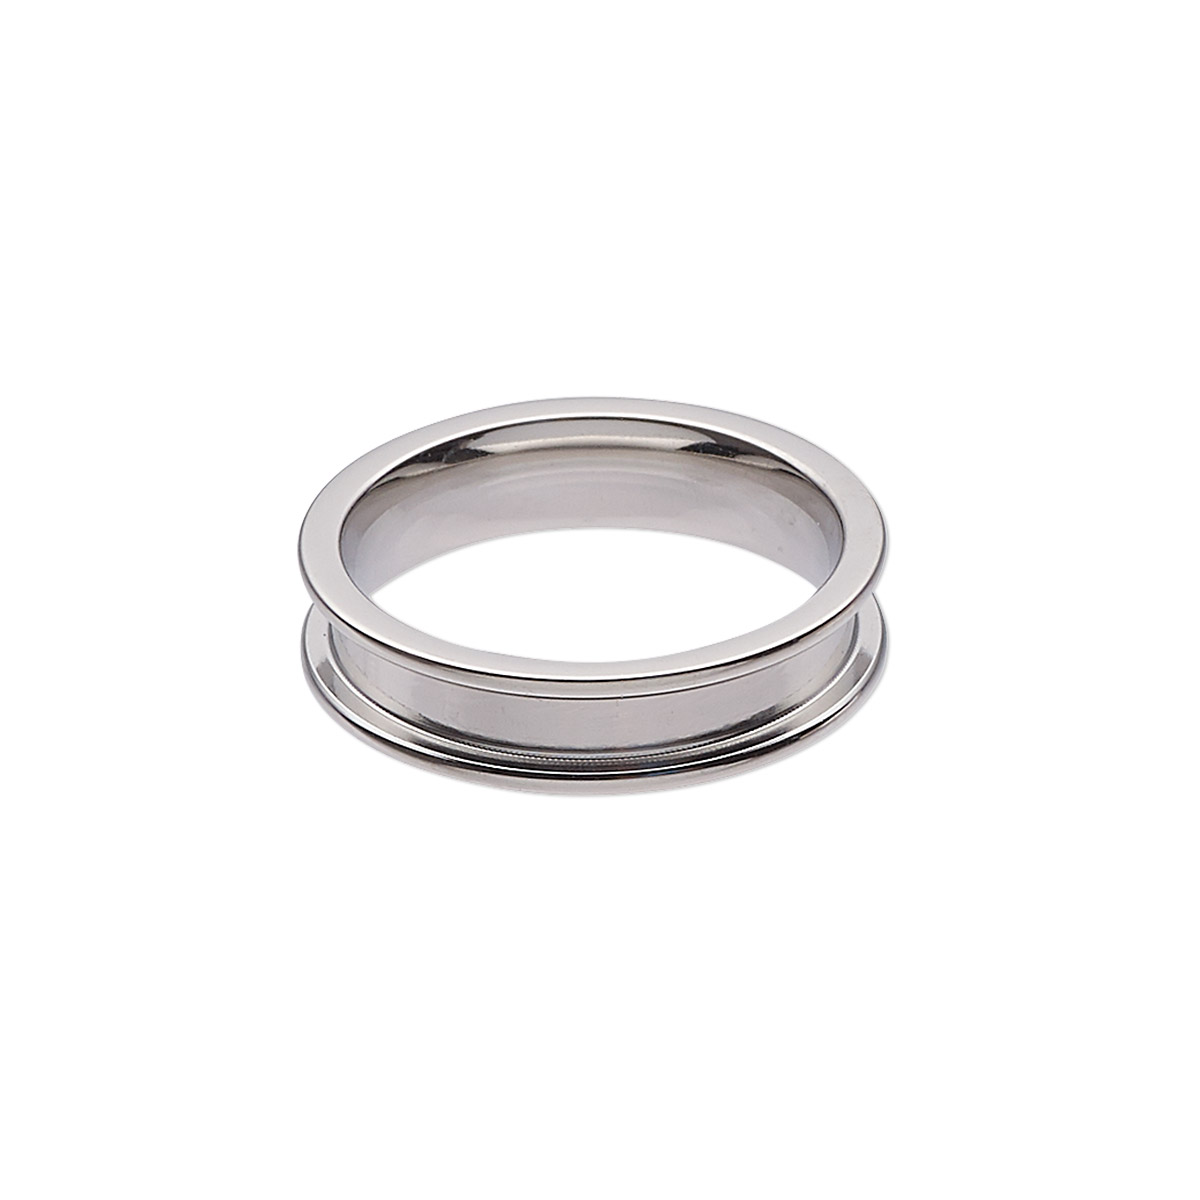 Ring, stainless steel, 5mm wide band with 2.9mm wide channel, size 7 ...